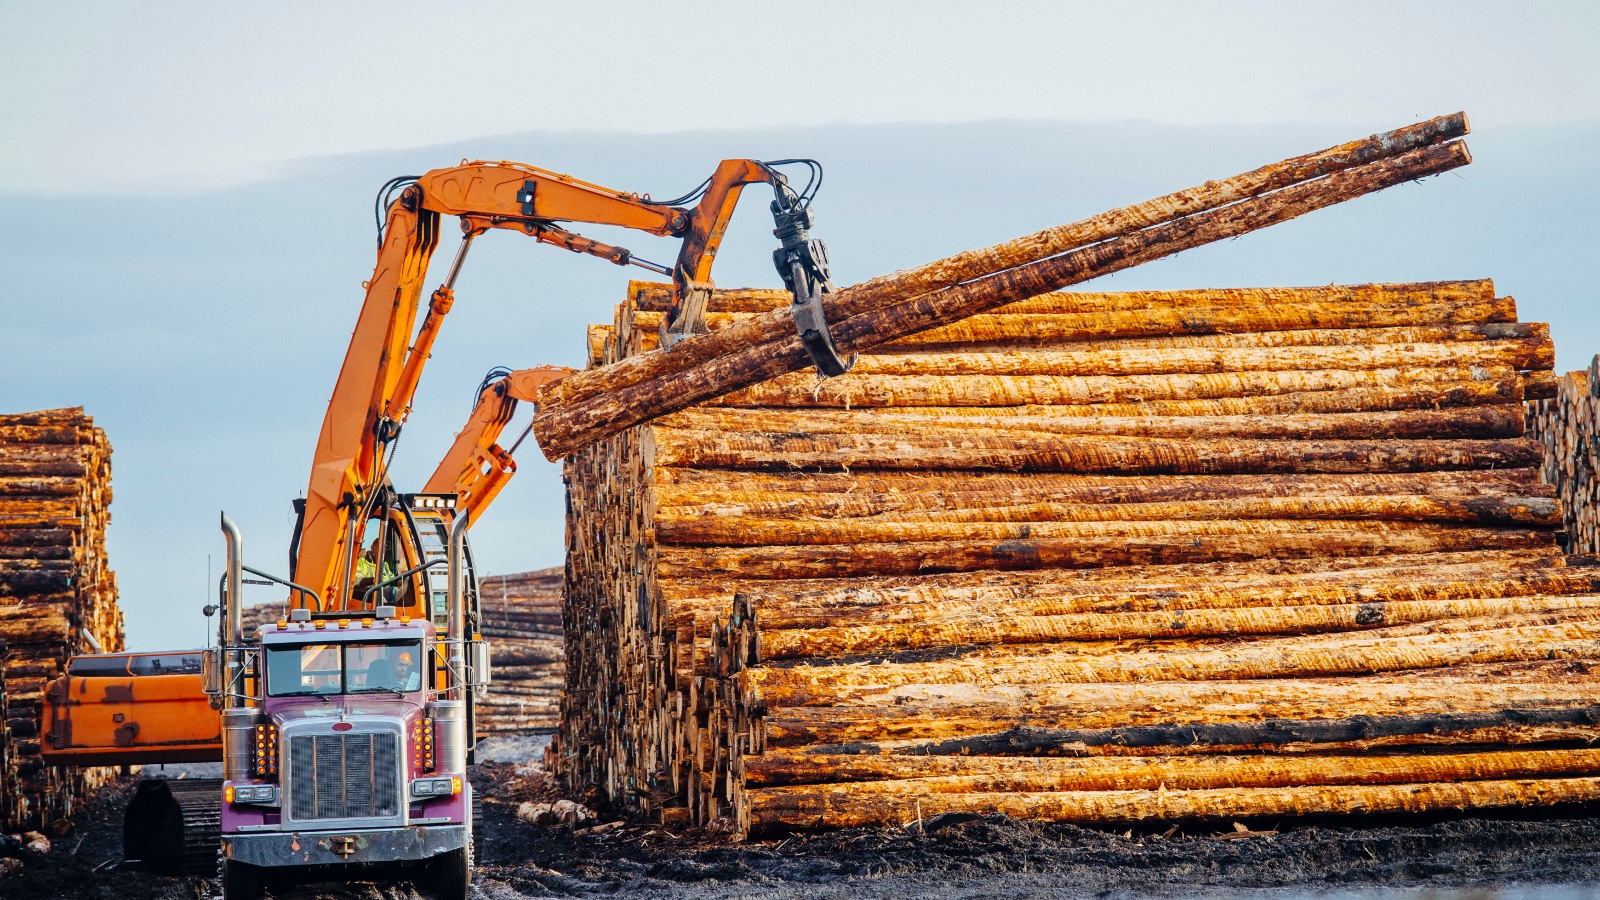 A big machine lifts logs from a stack of raw timber